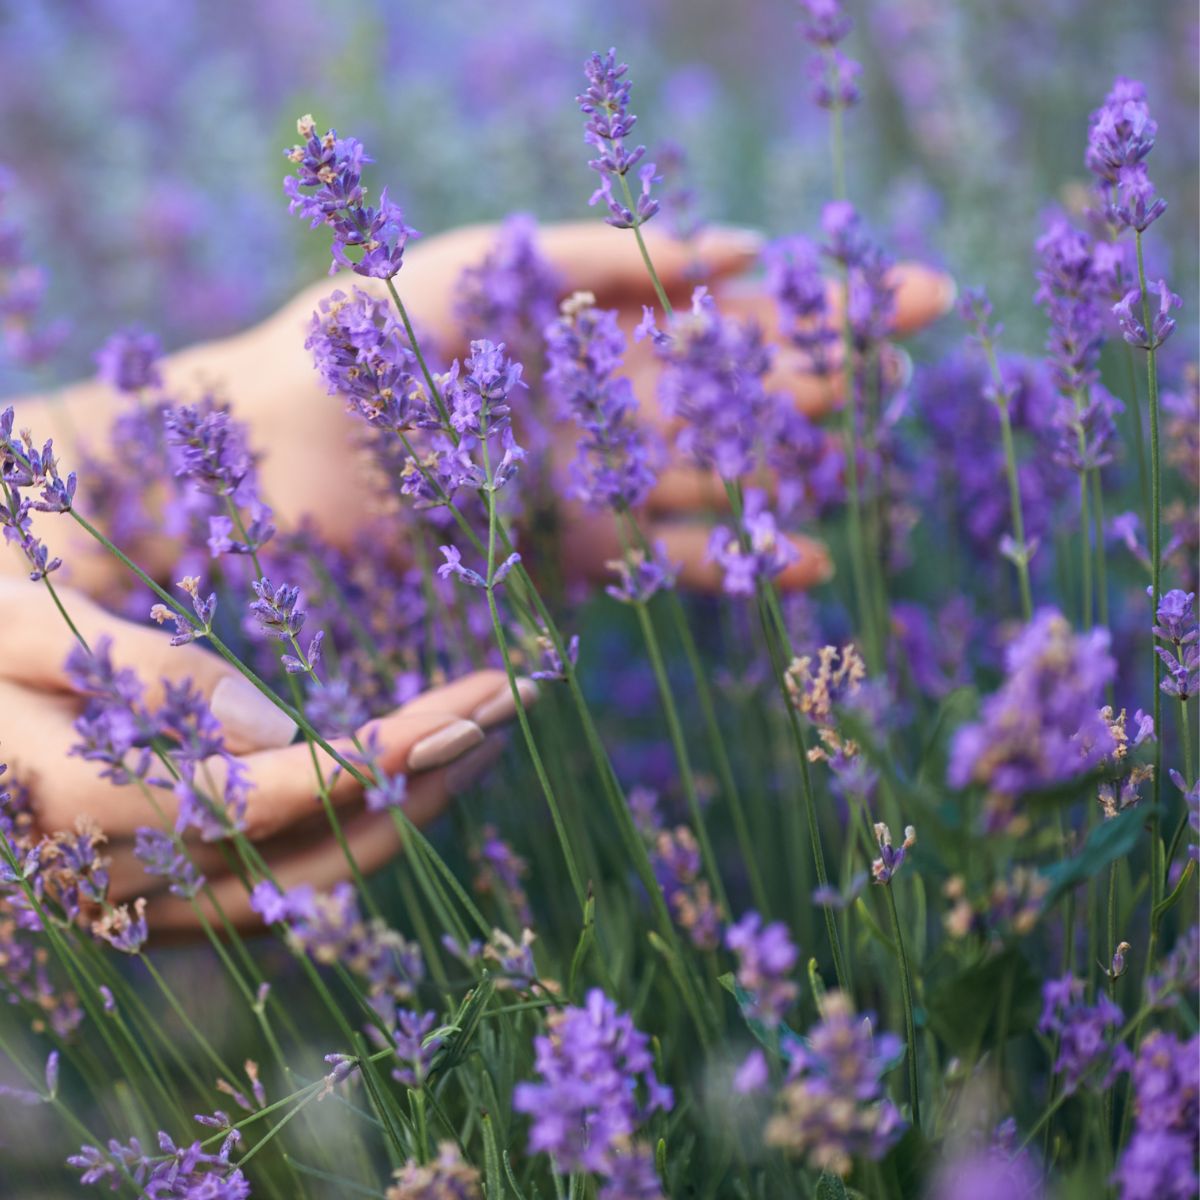 A woman's hands in lavender flowers.